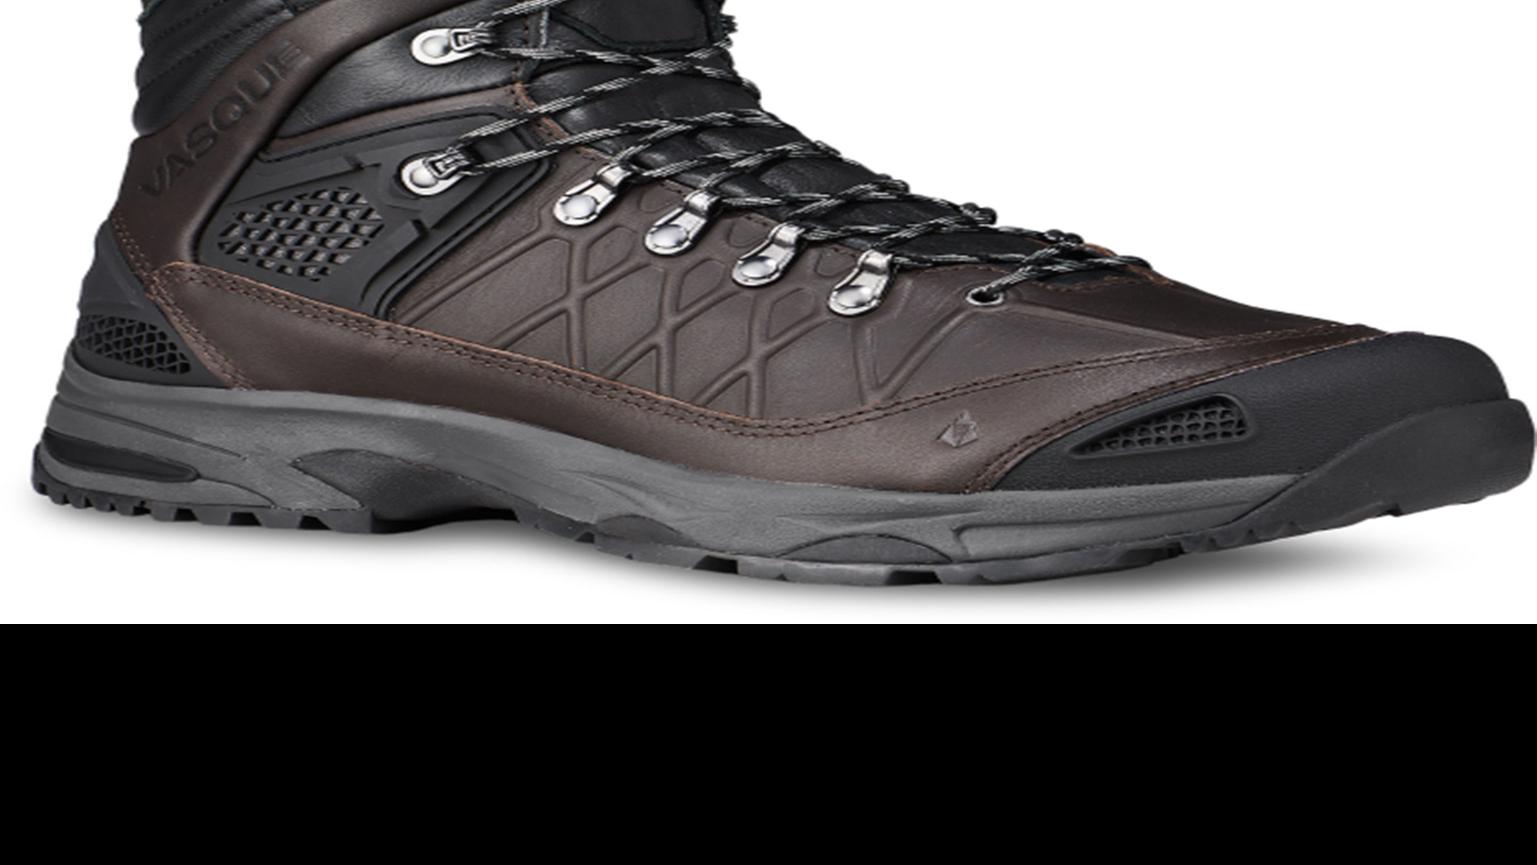 Hiking boots mix old-school support with modern performance